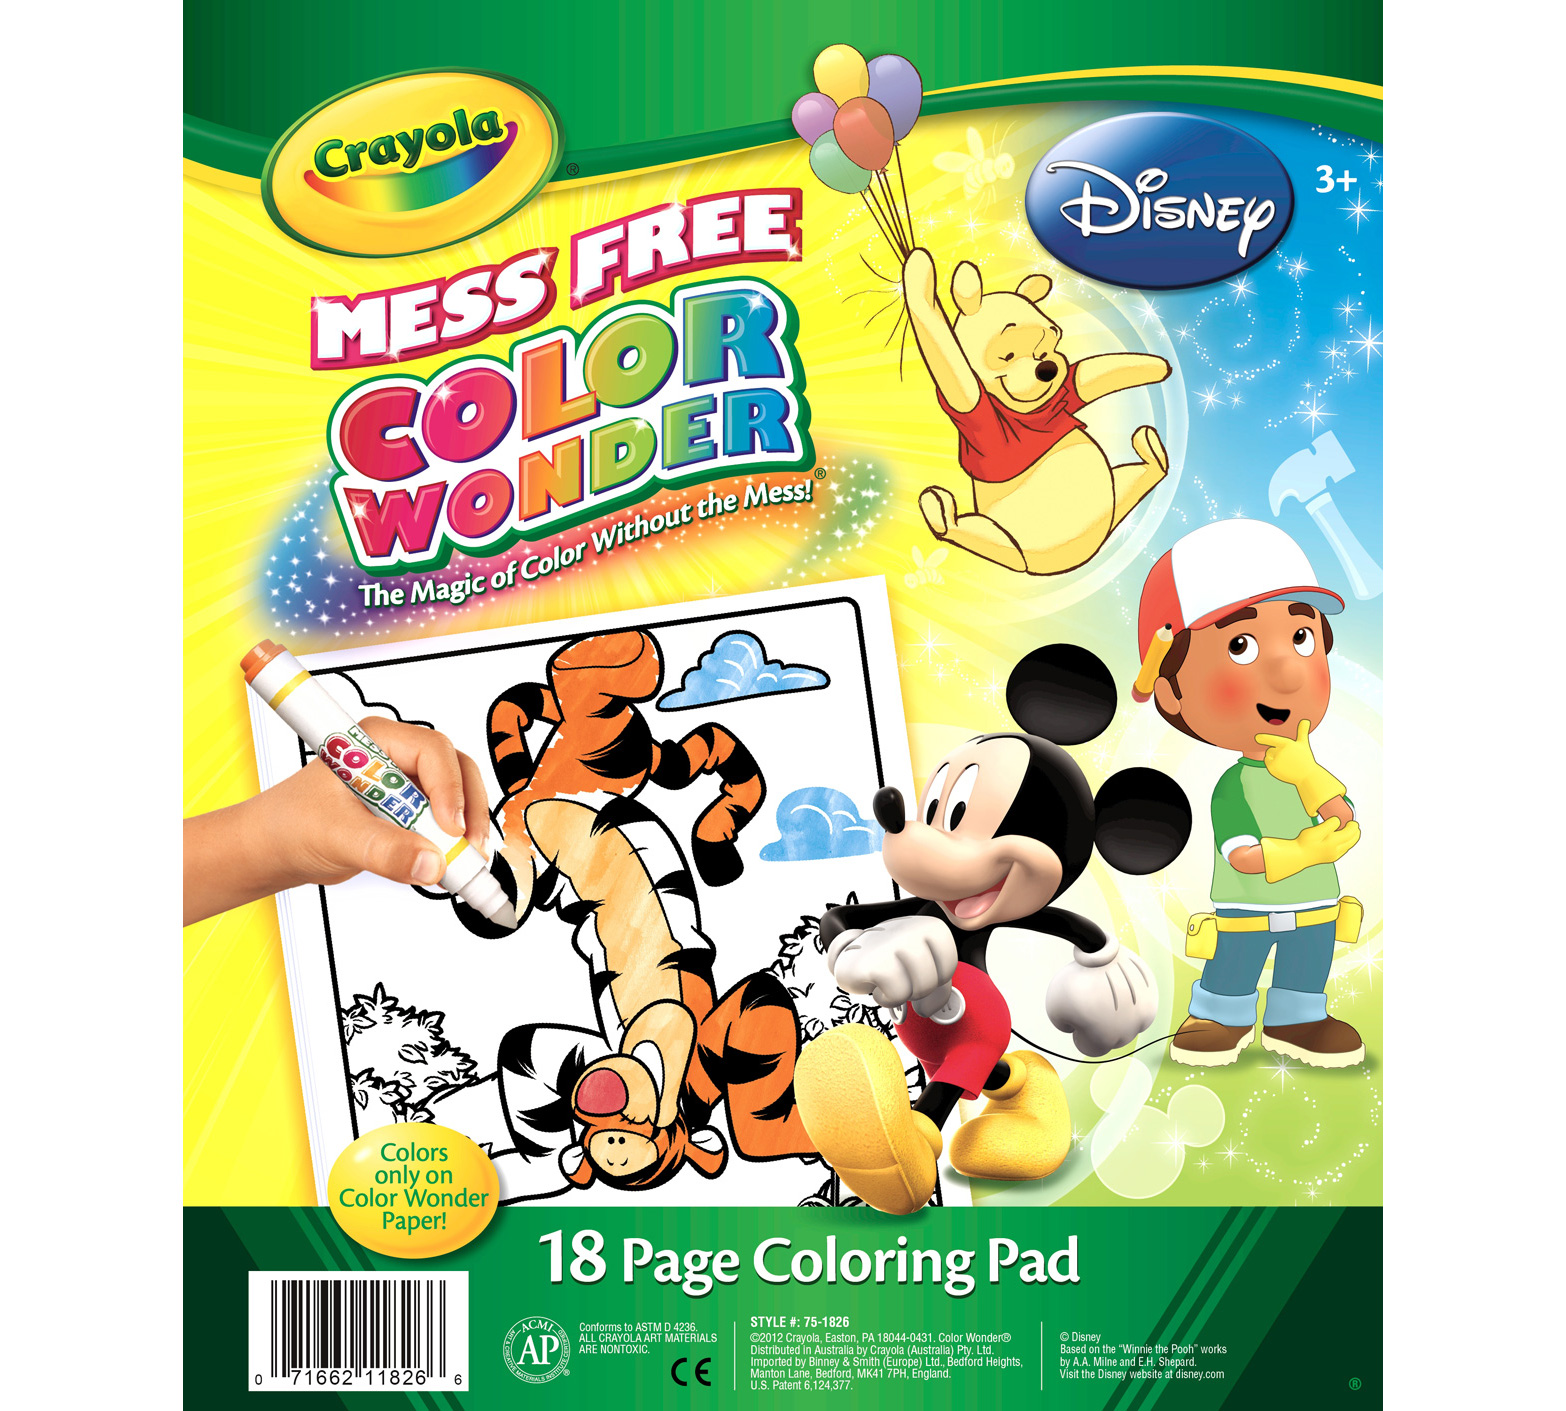 Products Color Wonder Coloring Pad Winnie The Pooh Product Coloring